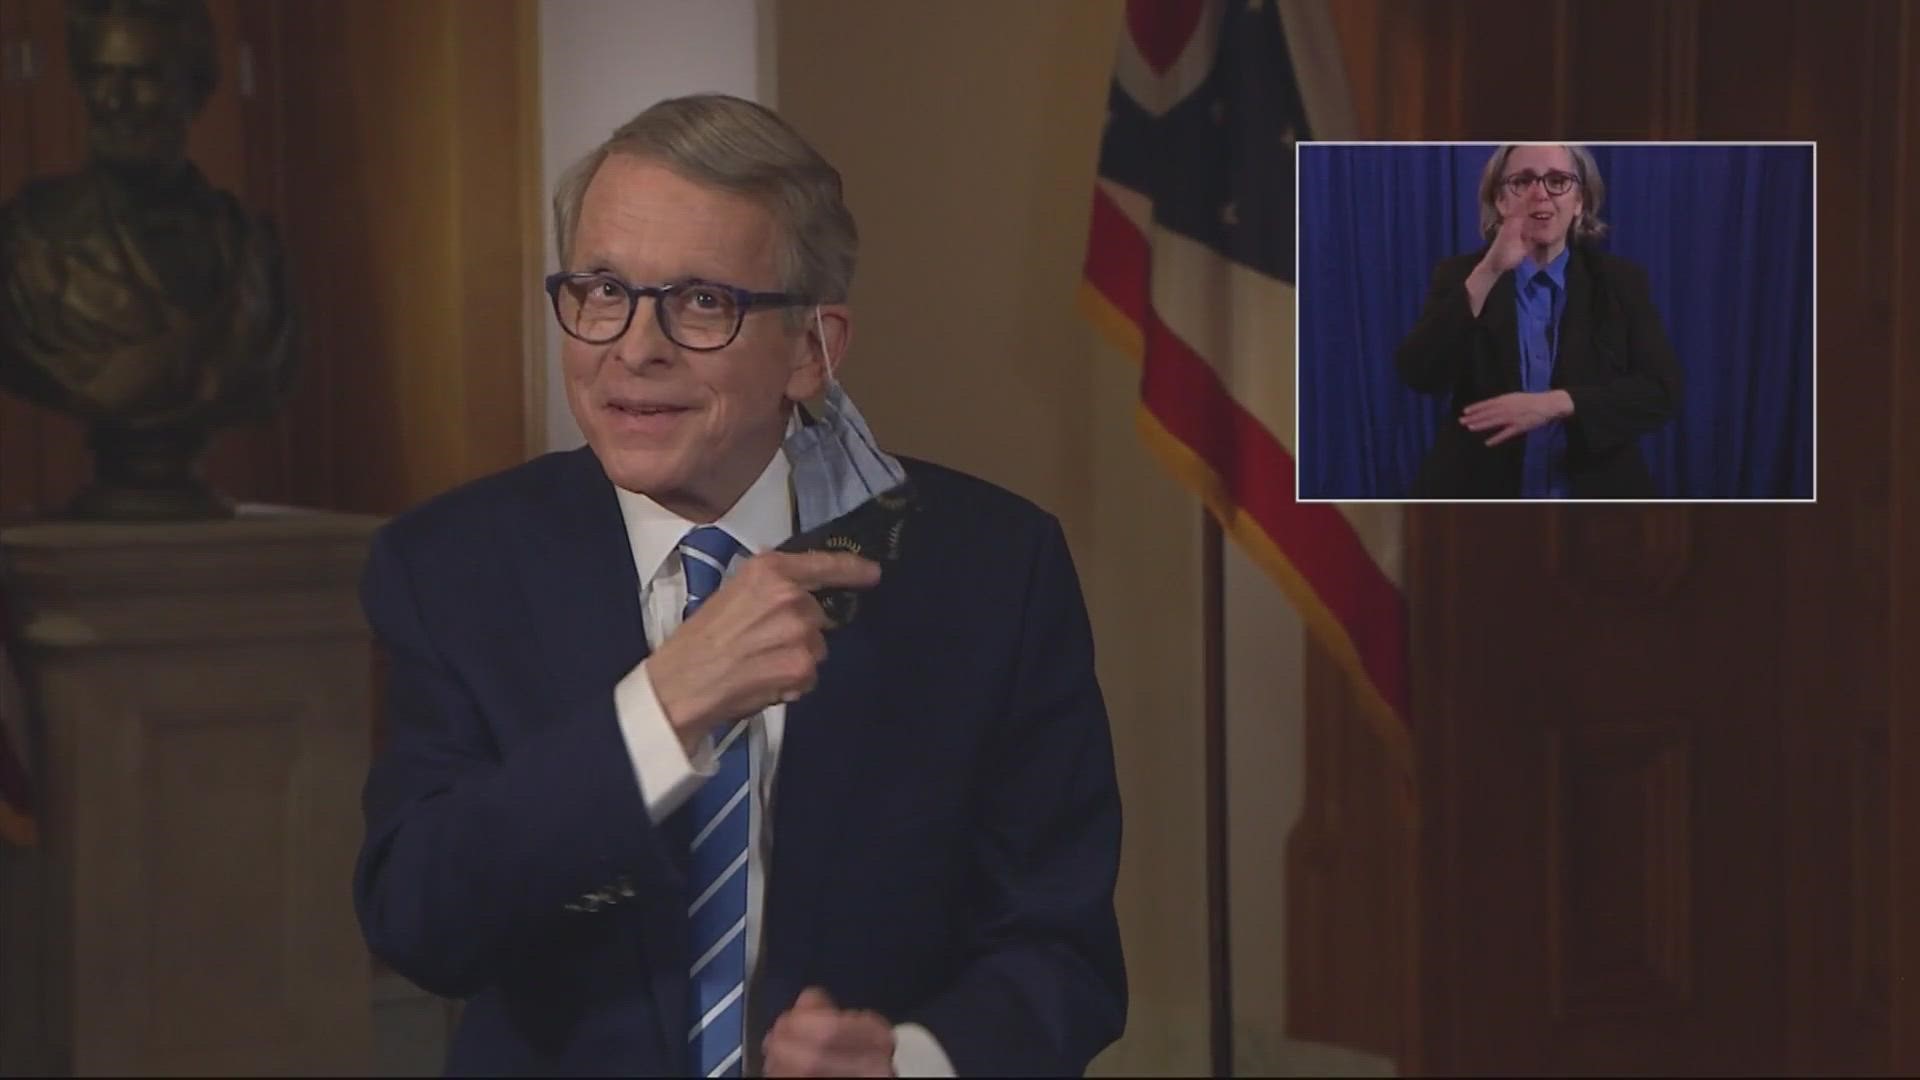 DeWine made the announcement Thursday that the state is on the 'path to victory.'